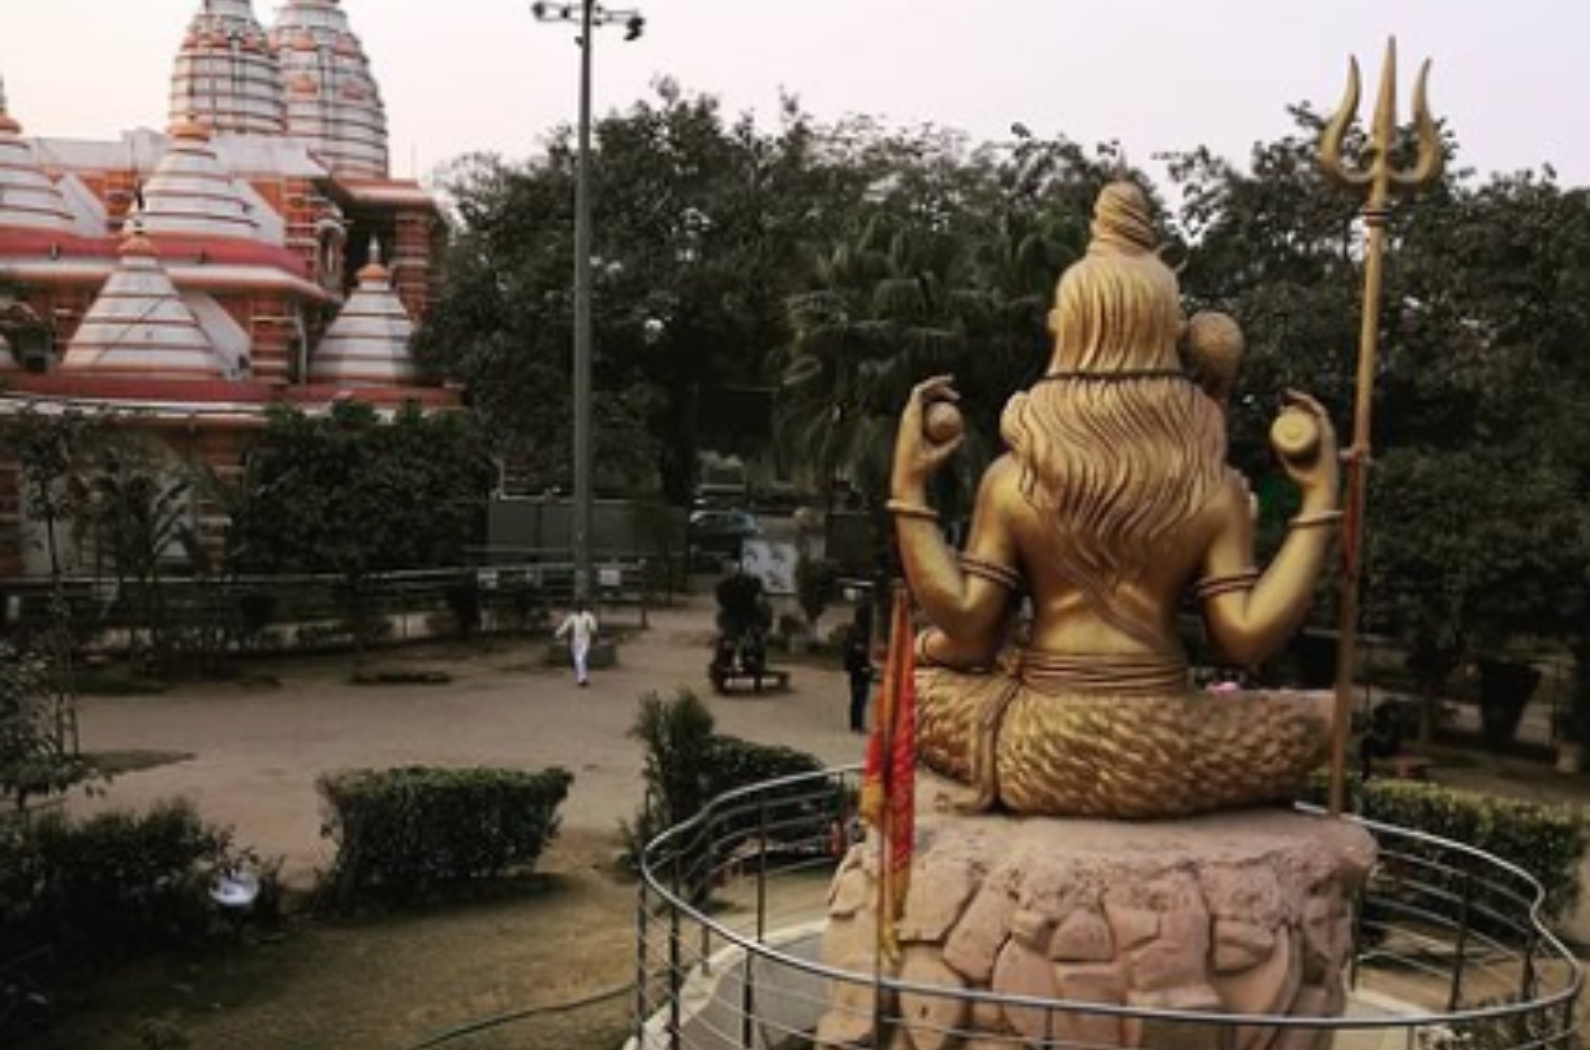 Sheetla Mata Temple is the oldest Hindu pilgrimage. it is believed that this temple in Gurgaon is associated with the story of the Mahabharata.